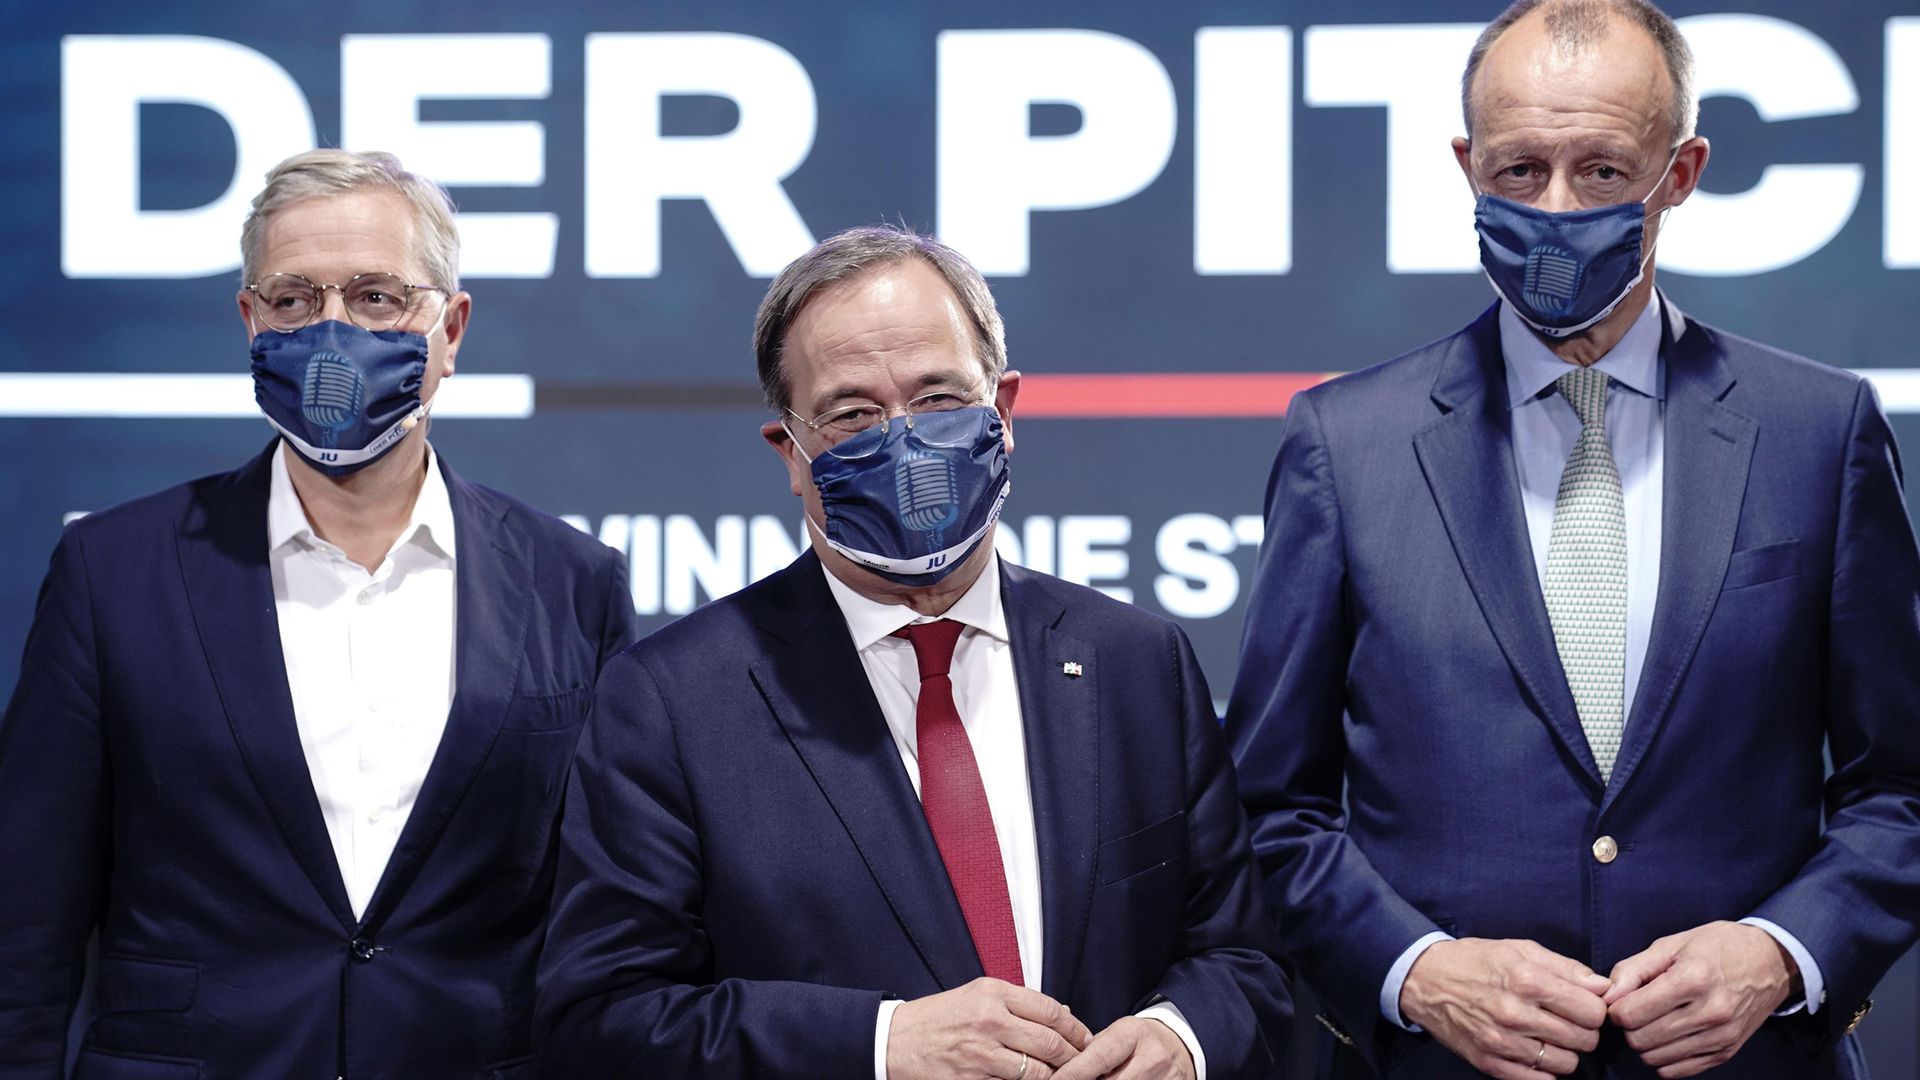 The three candidates for the leadership of the Christian Democratic Union party (CDU), Armin Laschet (C), Friedrich Merz (R) and Norbert Rottgen pose for a photo - Credit: POOL/AFP via Getty Images